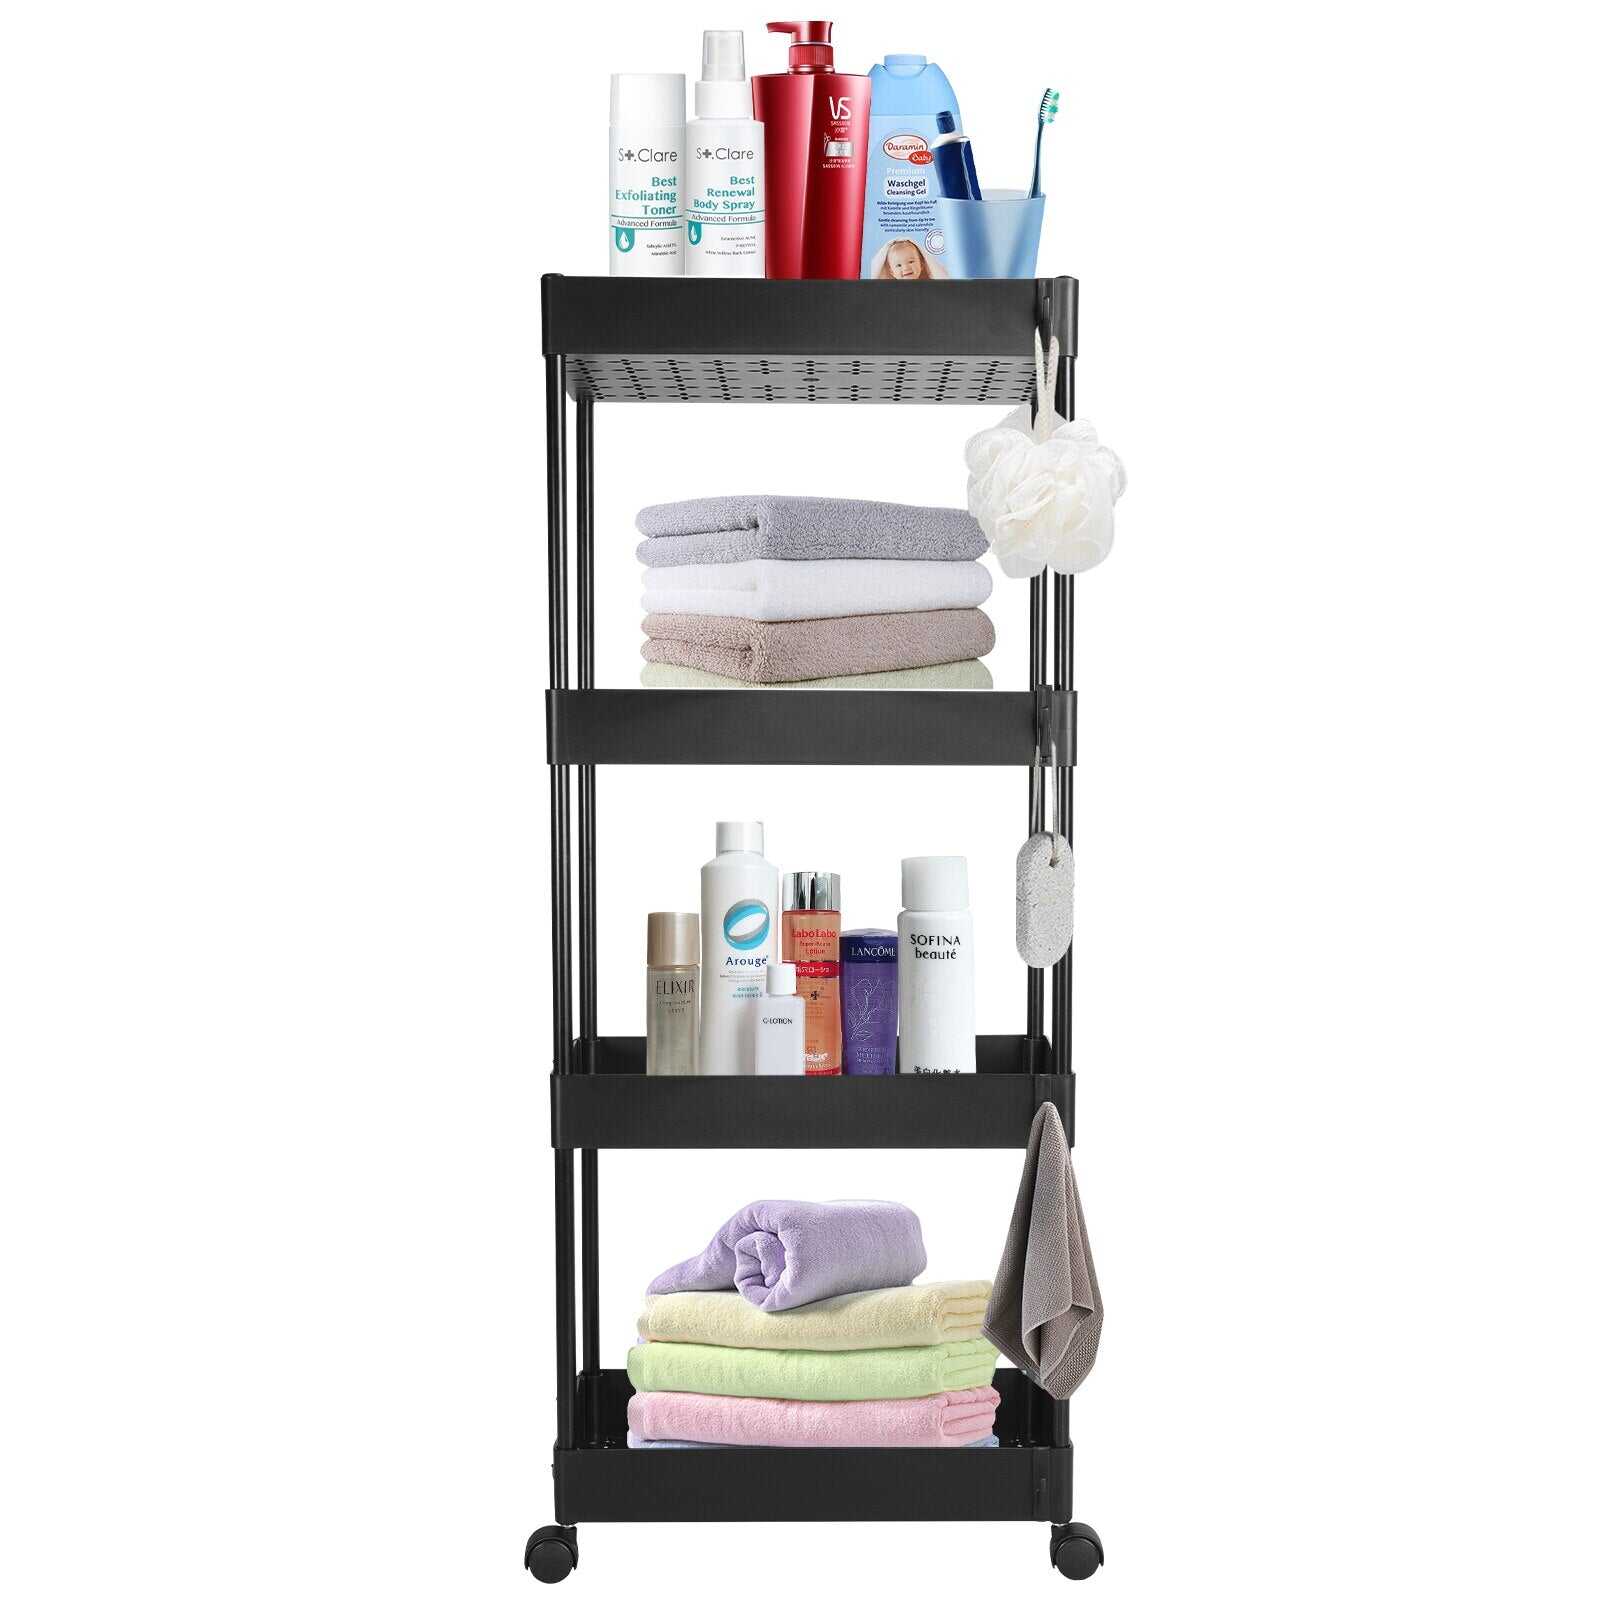 4 Tier Rolling Storage Organizer Mobile Utility Cart with Wheel